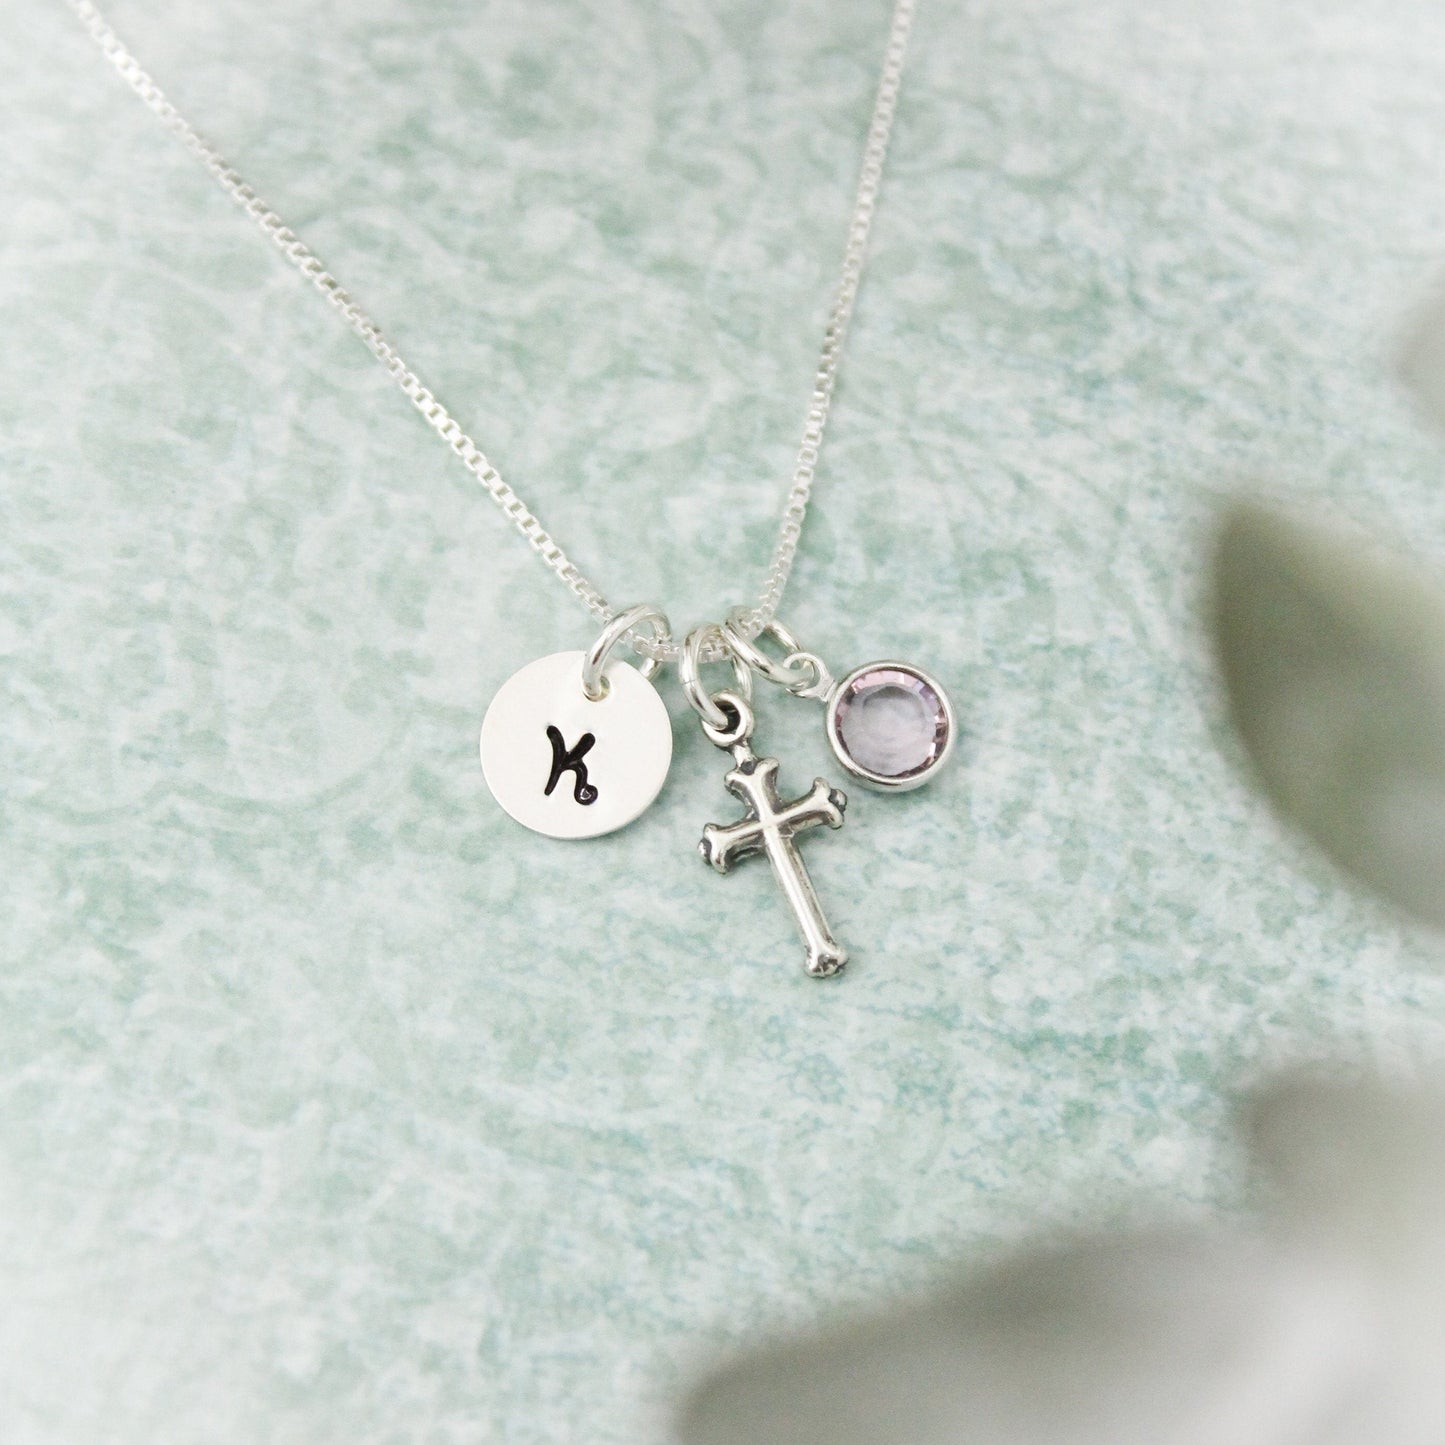 Cross Charm Necklace, Confirmation Cross Necklace, First Communion Cross Necklace, Personalized Hand Stamped Jewelry